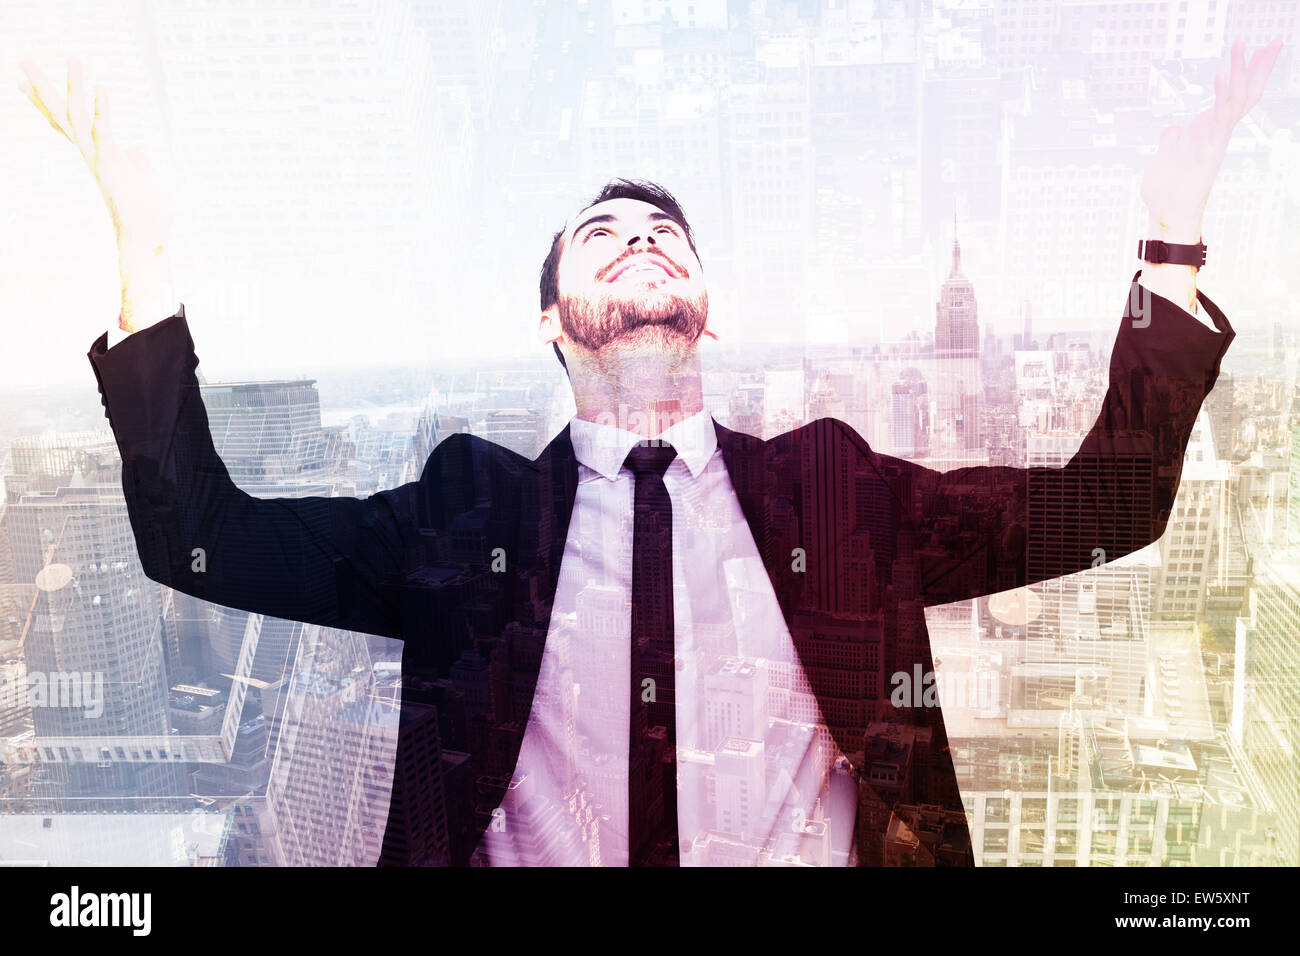 Composite image of businessman cheering with hands raised Stock Photo